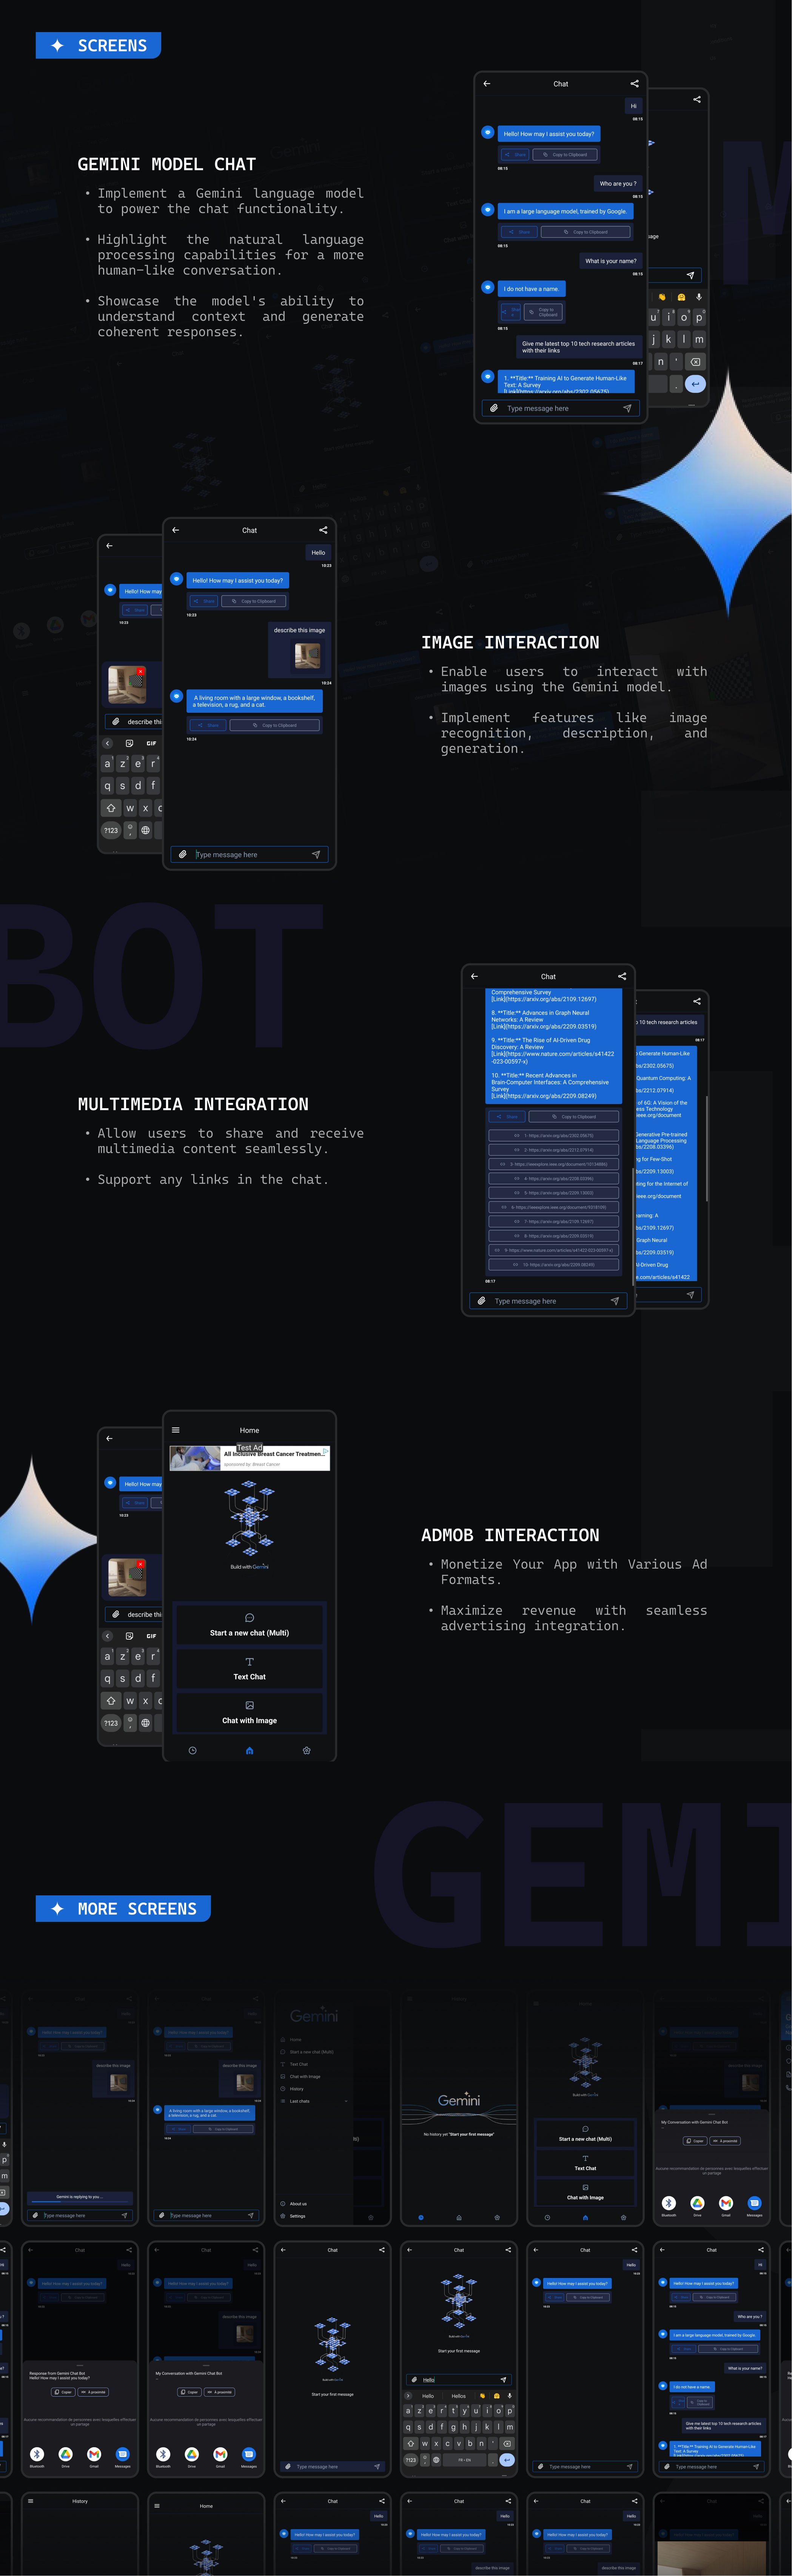 GemiBot v1.1 - Chat with Gemini AI from Google - 3